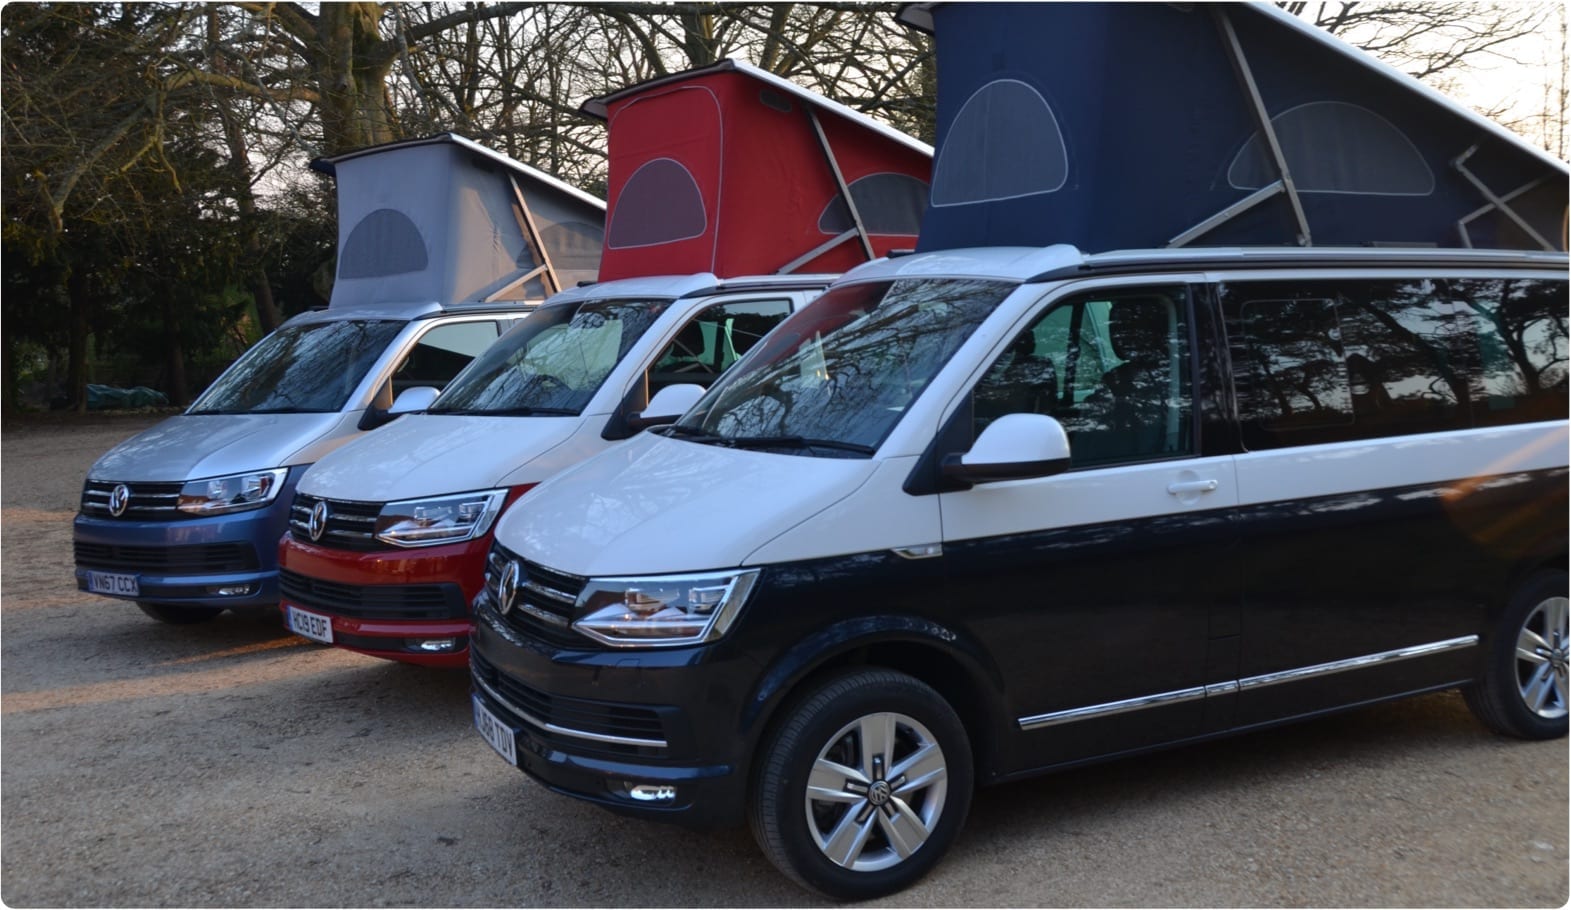 An image showcasing a range of campervans for hire in Southampton.